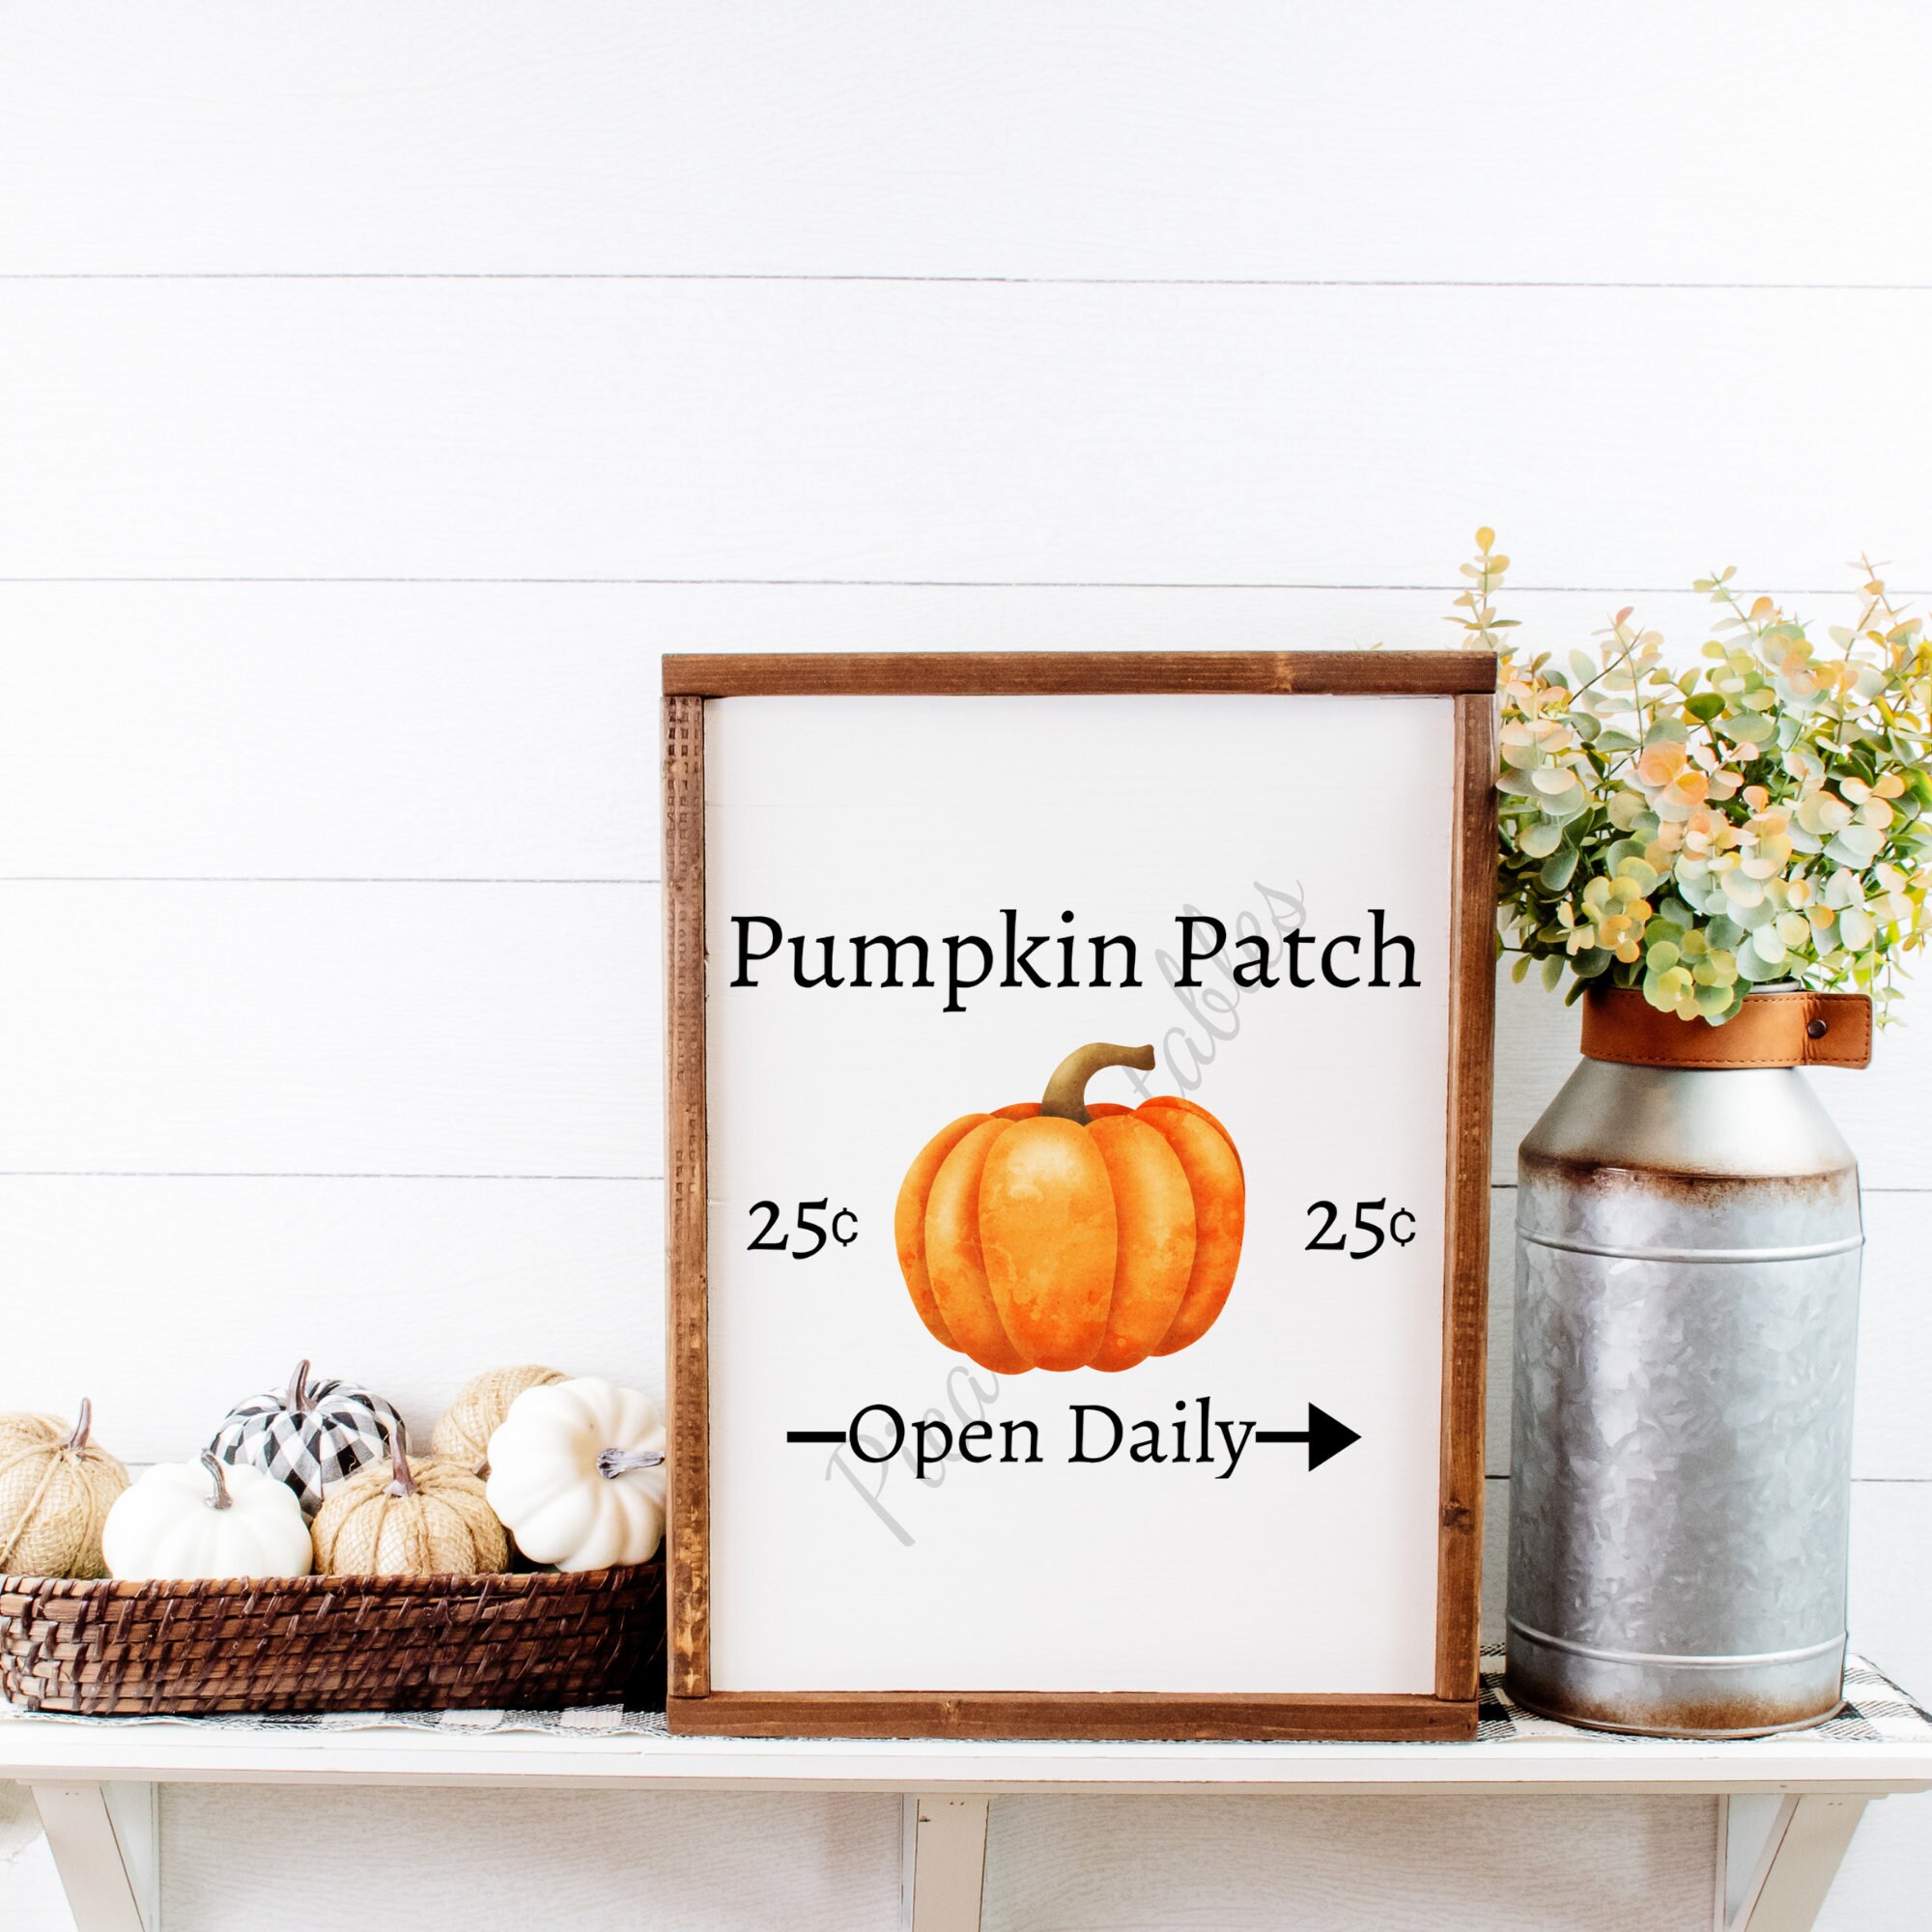 10 Must-Have Fall Home Decor Finds Under $25 - Pica's Printables